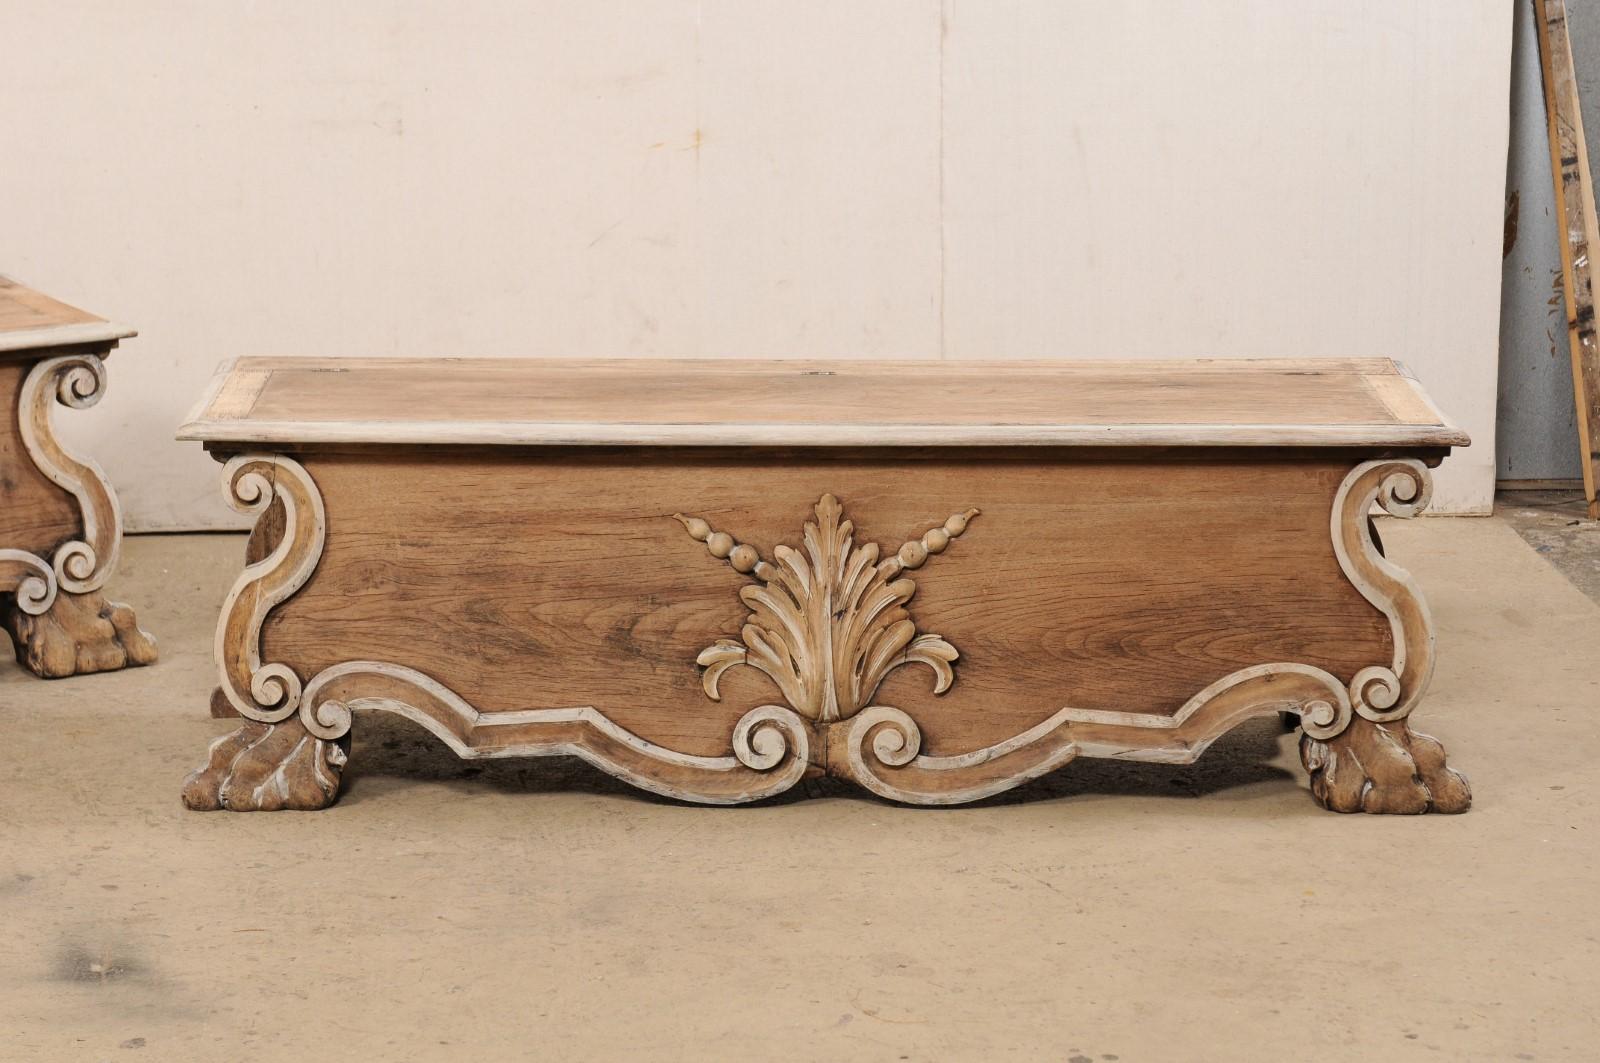 19th Century 19th C. Italian Pair of Wooden Baroque-Style Benches 'with Storage Beneath Seat'